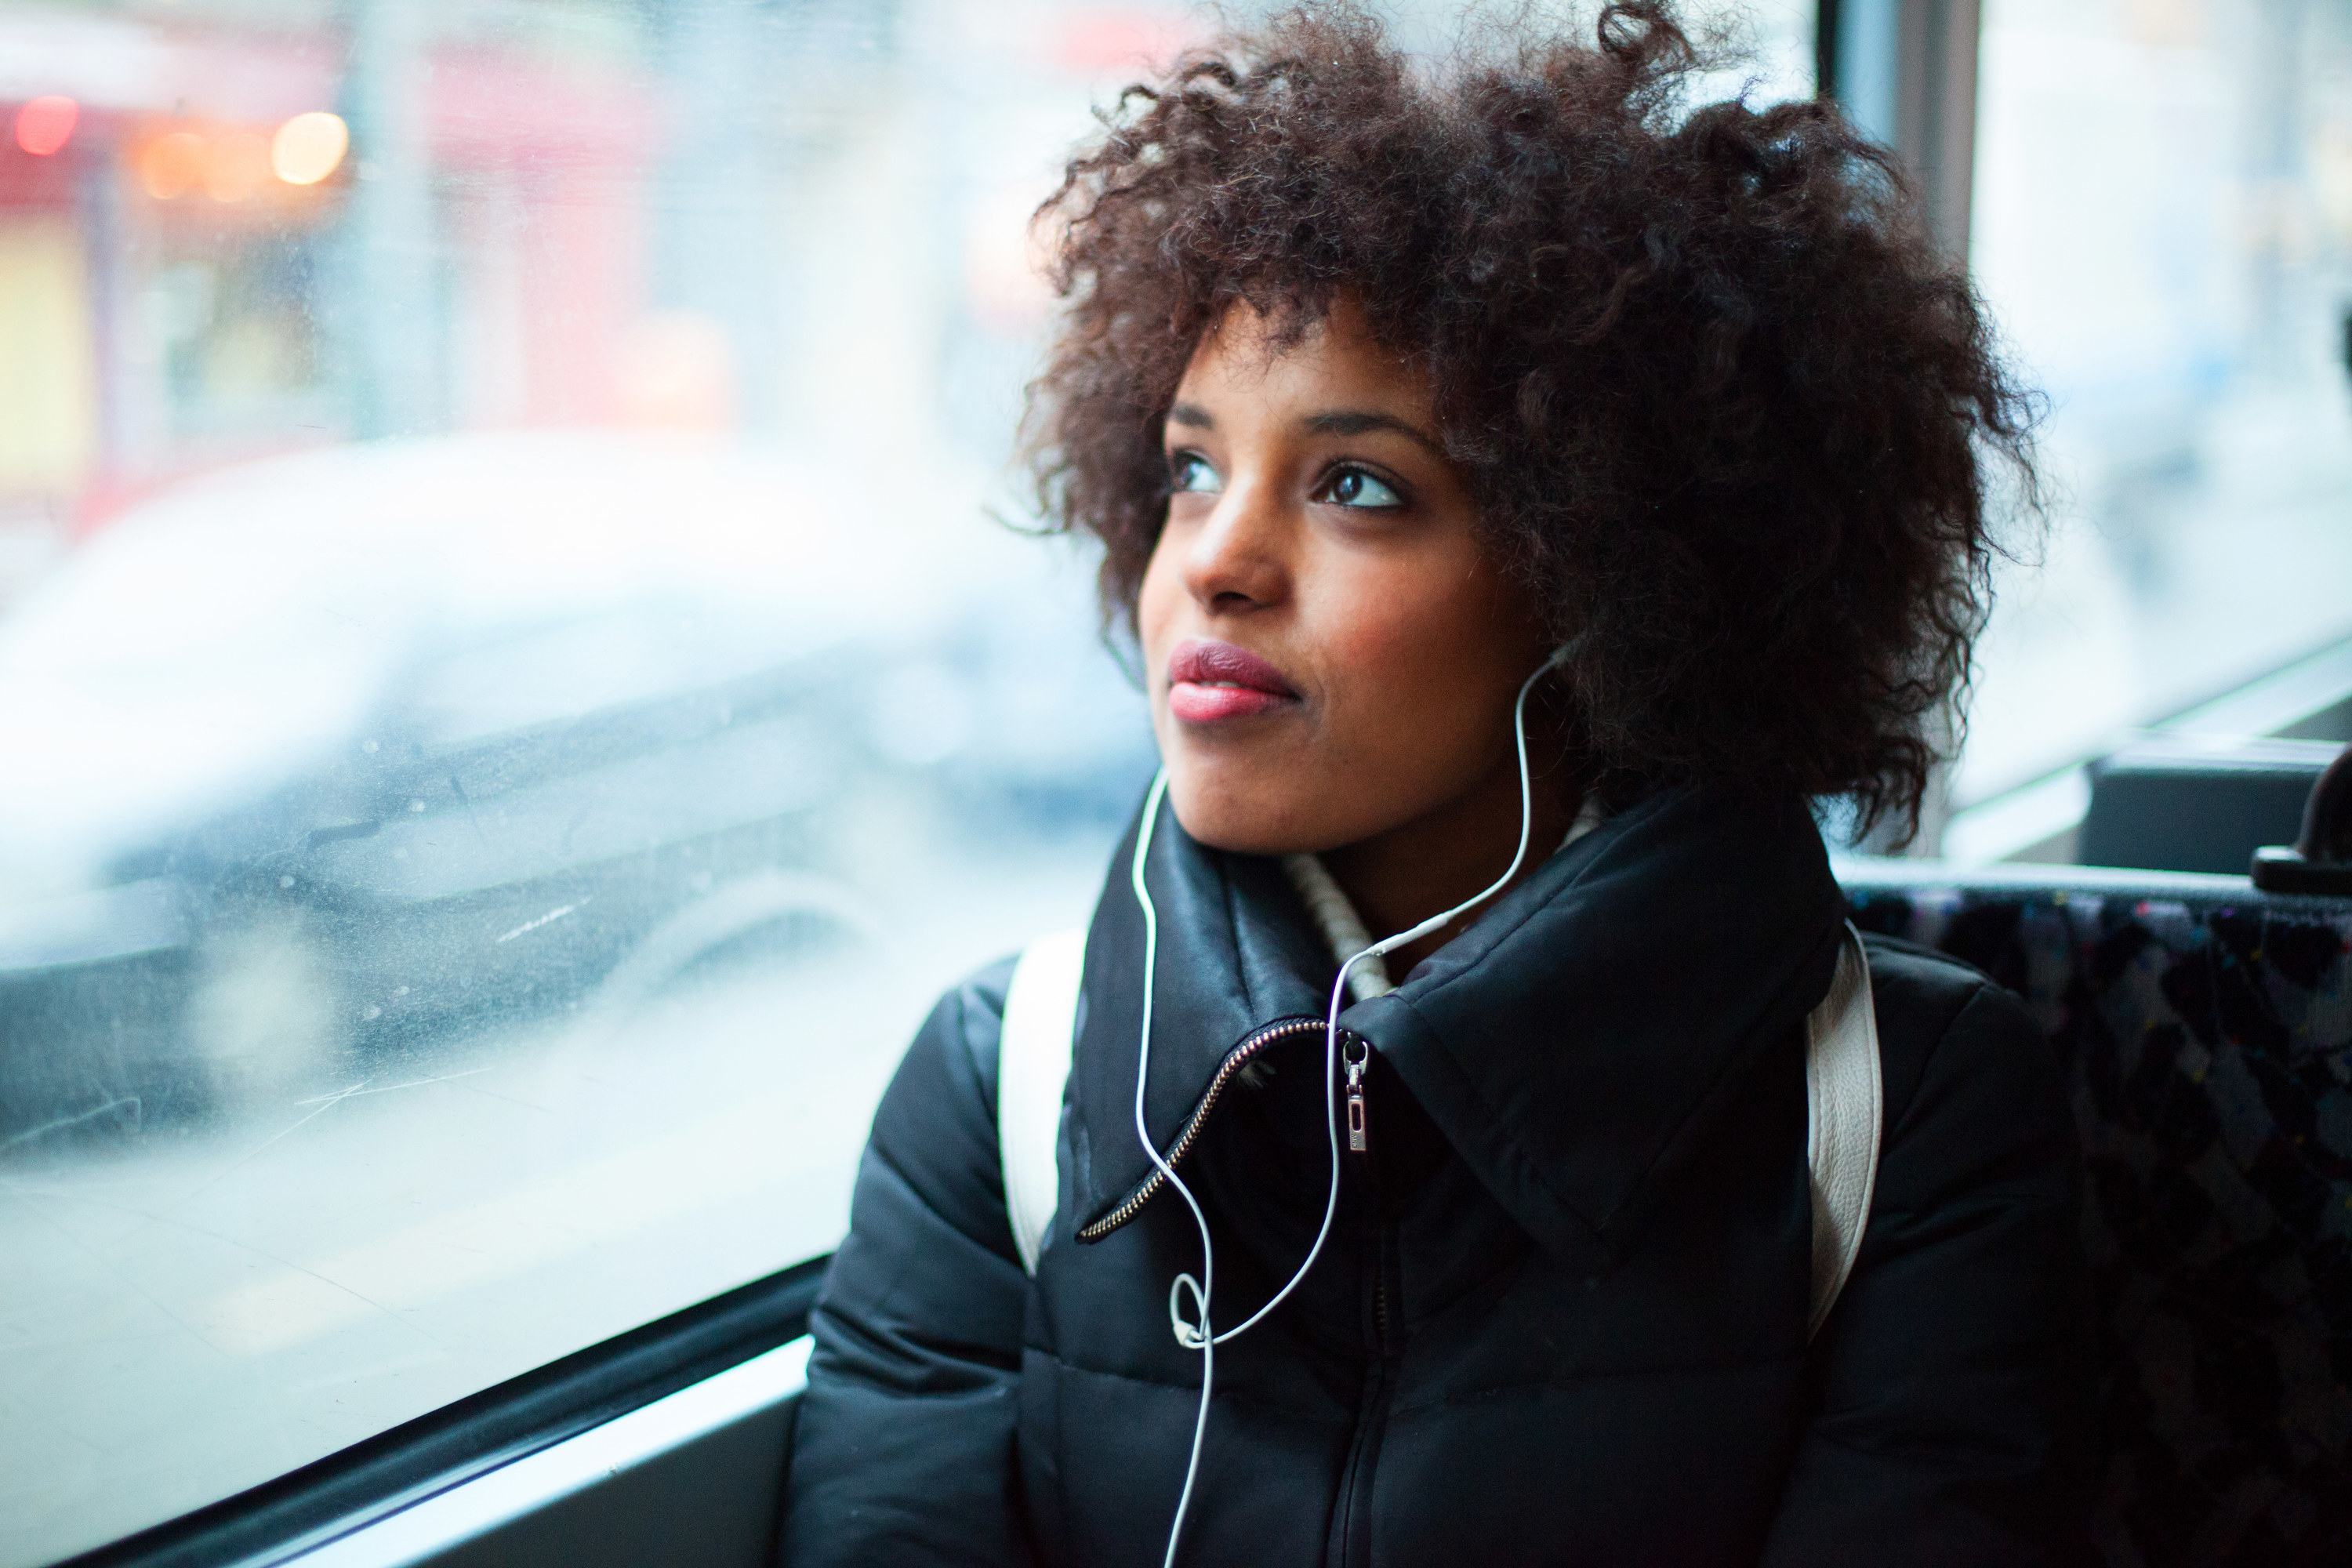 A woman listens to music while riding the bus